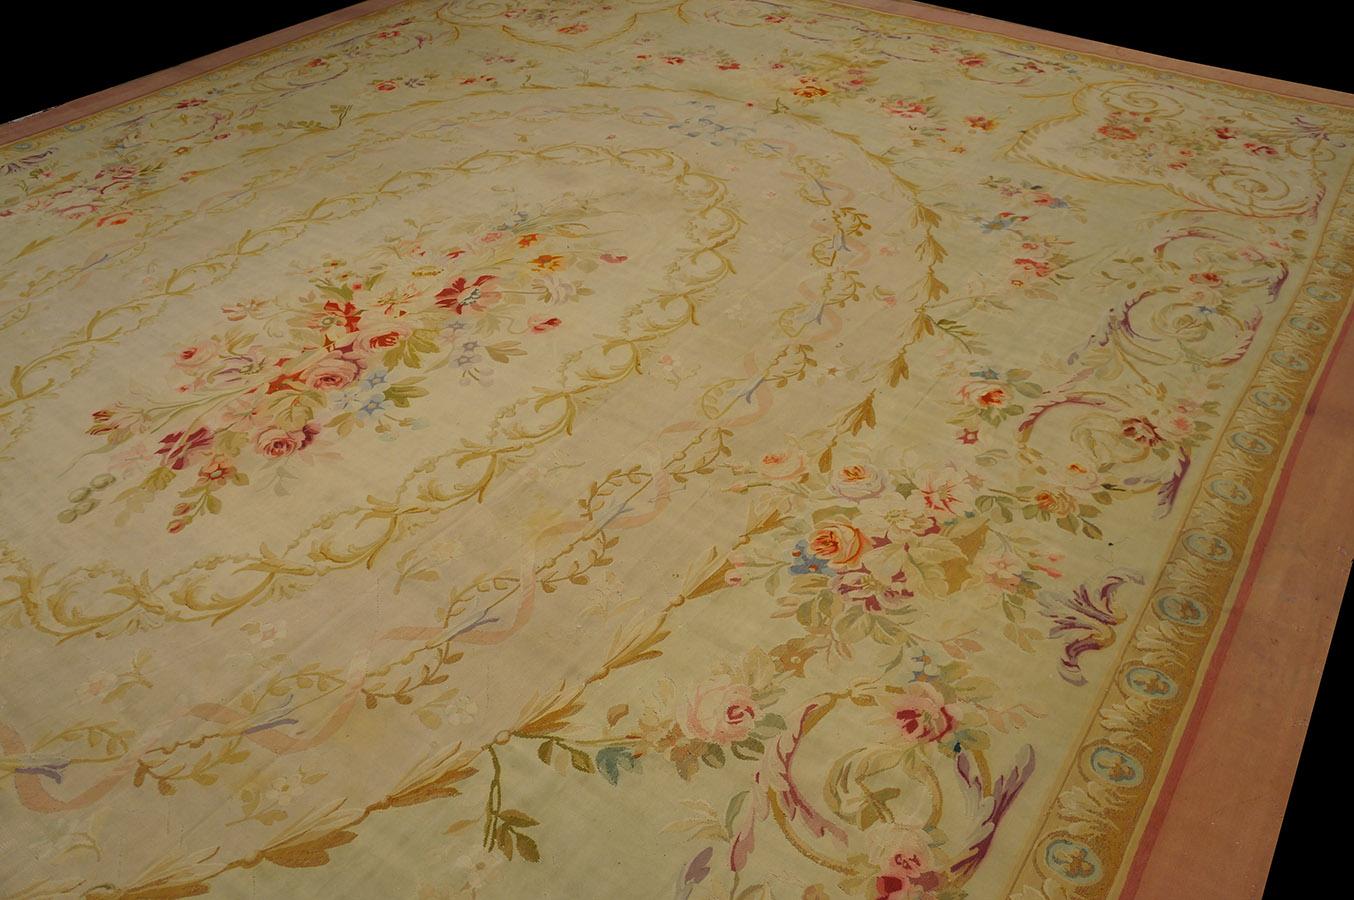 Early 20th Century French Aubusson Carpet ( 14'5' x 20'9'' - 440 x 633 ) 2